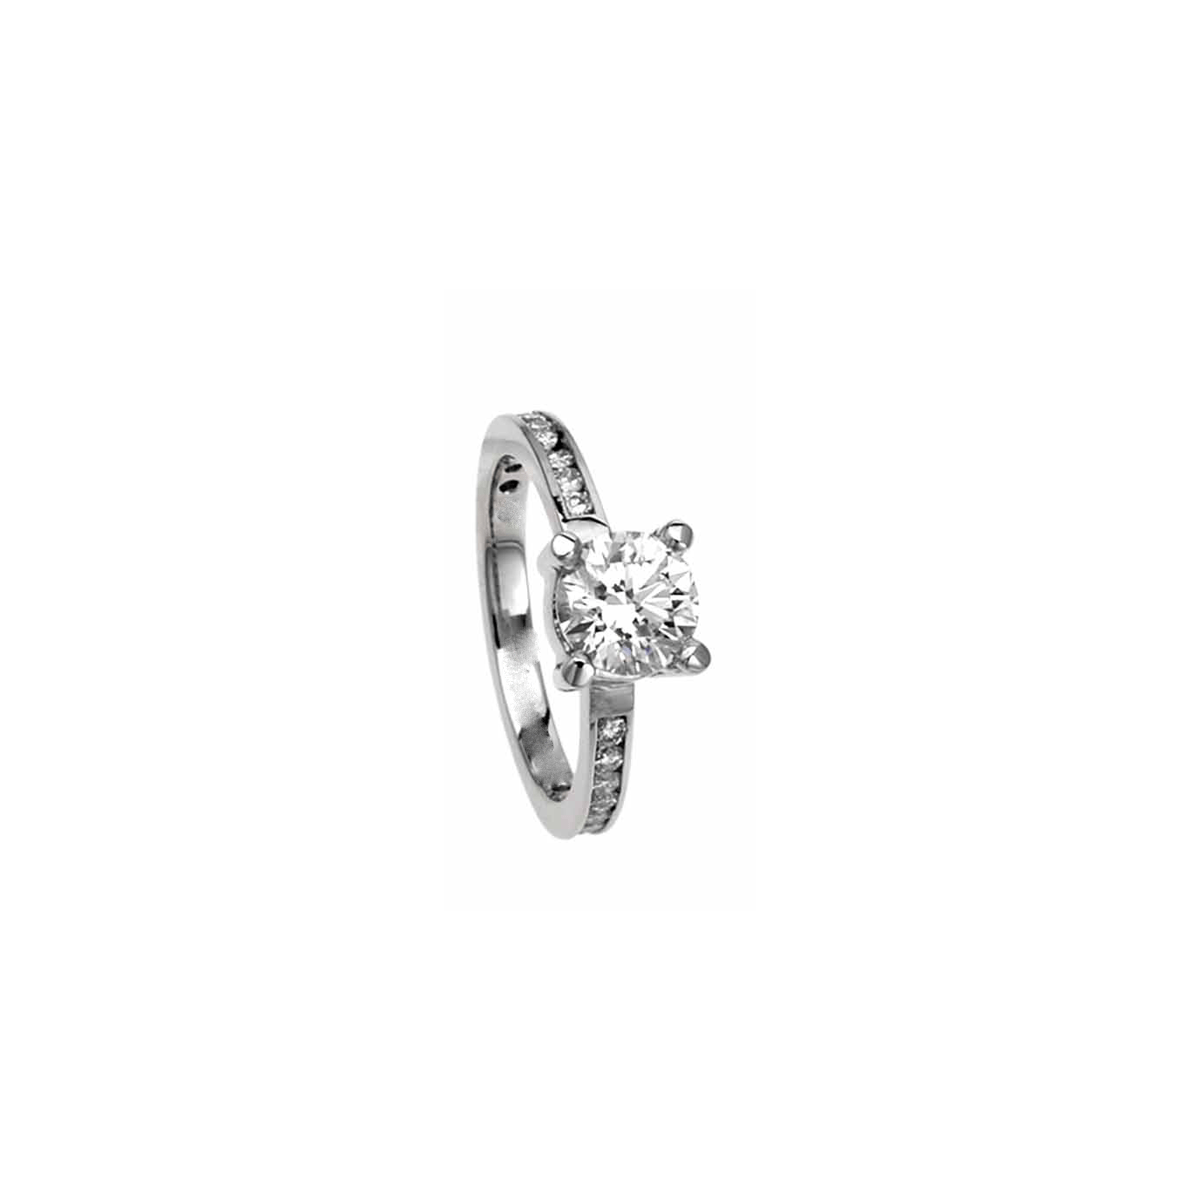 CLASSIC ENGAGEMENT RING - Chris Aire Fine Jewelry & Timepieces